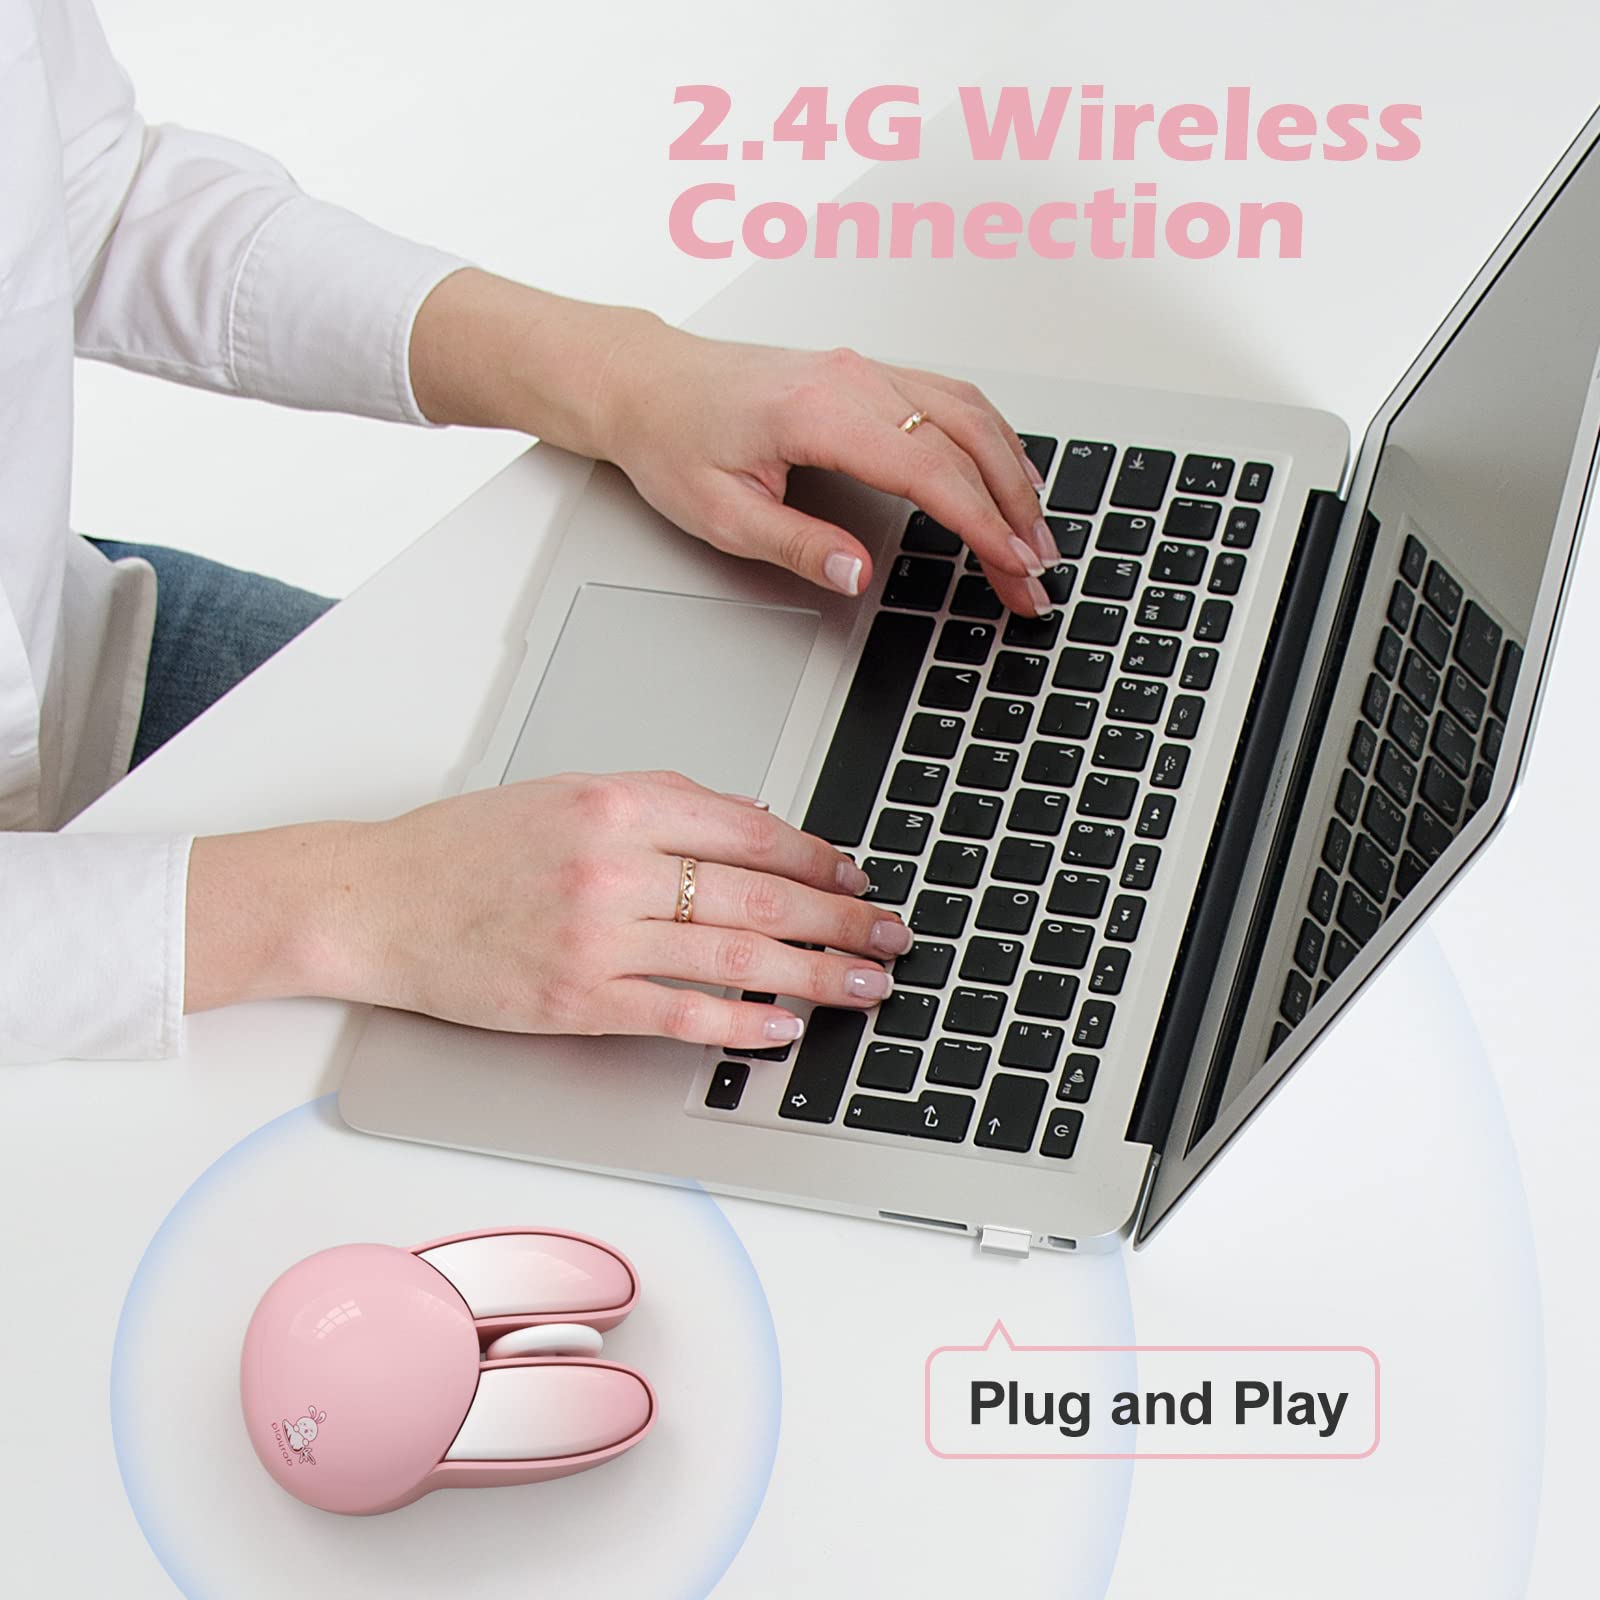 KNOWSQT Bunny Wireless Mouse Pink, 2.4G Silent Rabbit Mice with USB Receiver - for Windows Laptop PC Mac Desktop Gaming